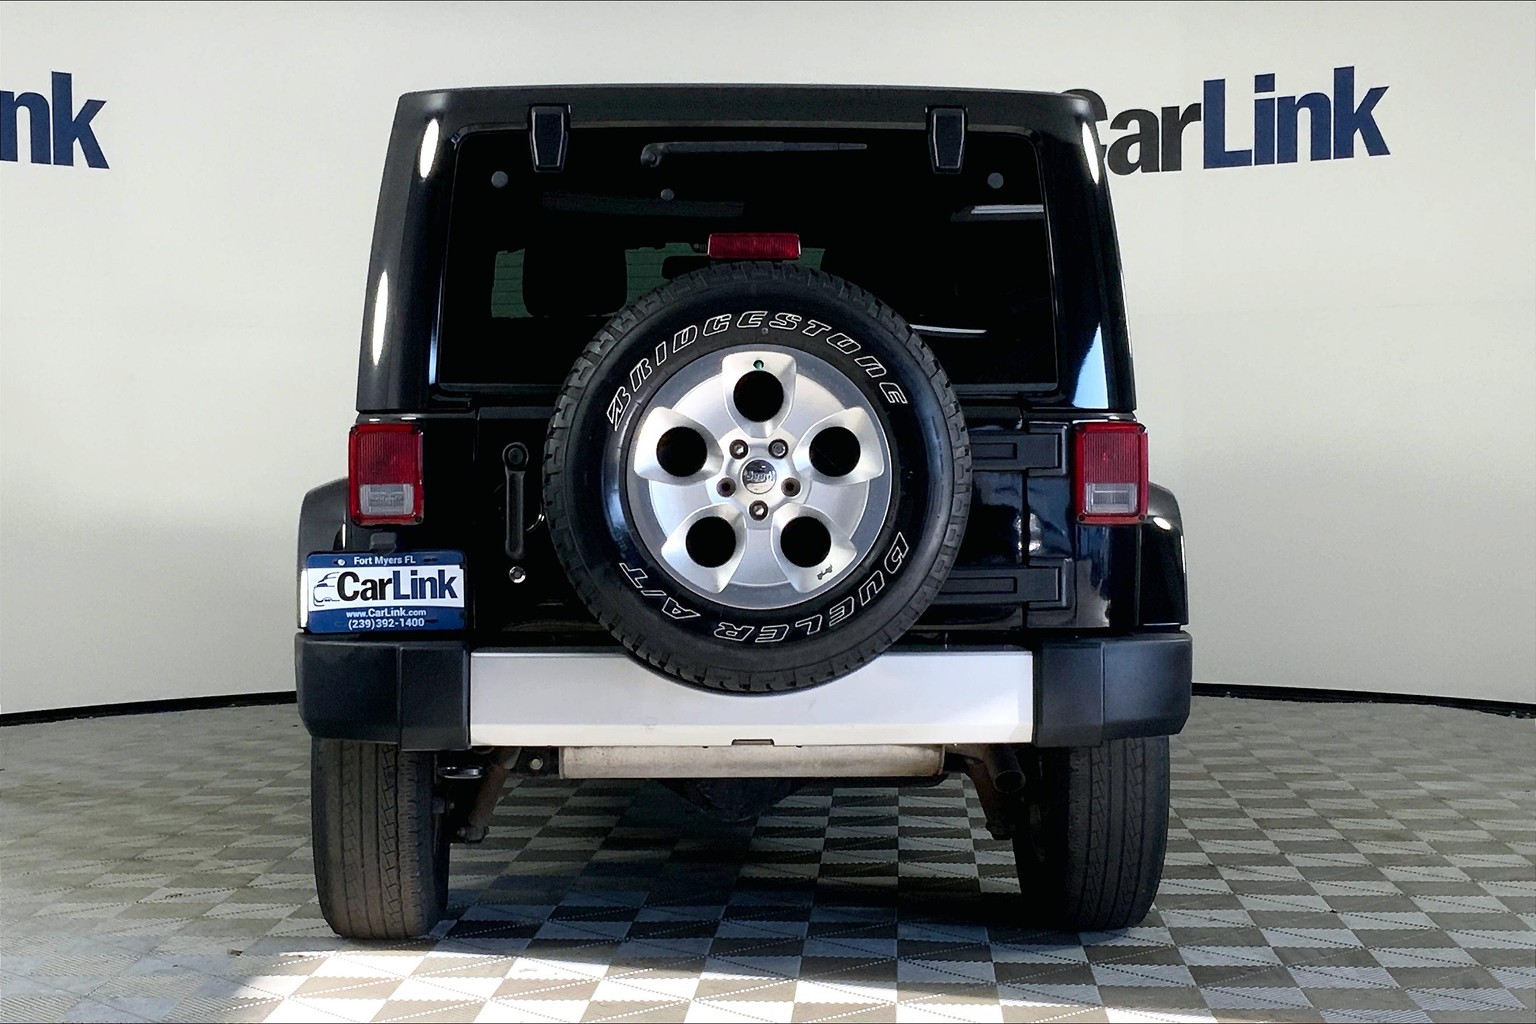 Pre-Owned 2015 Jeep Wrangler Unlimited Sahara 4D Sport Utility in  Morristown #20609A | CarLink